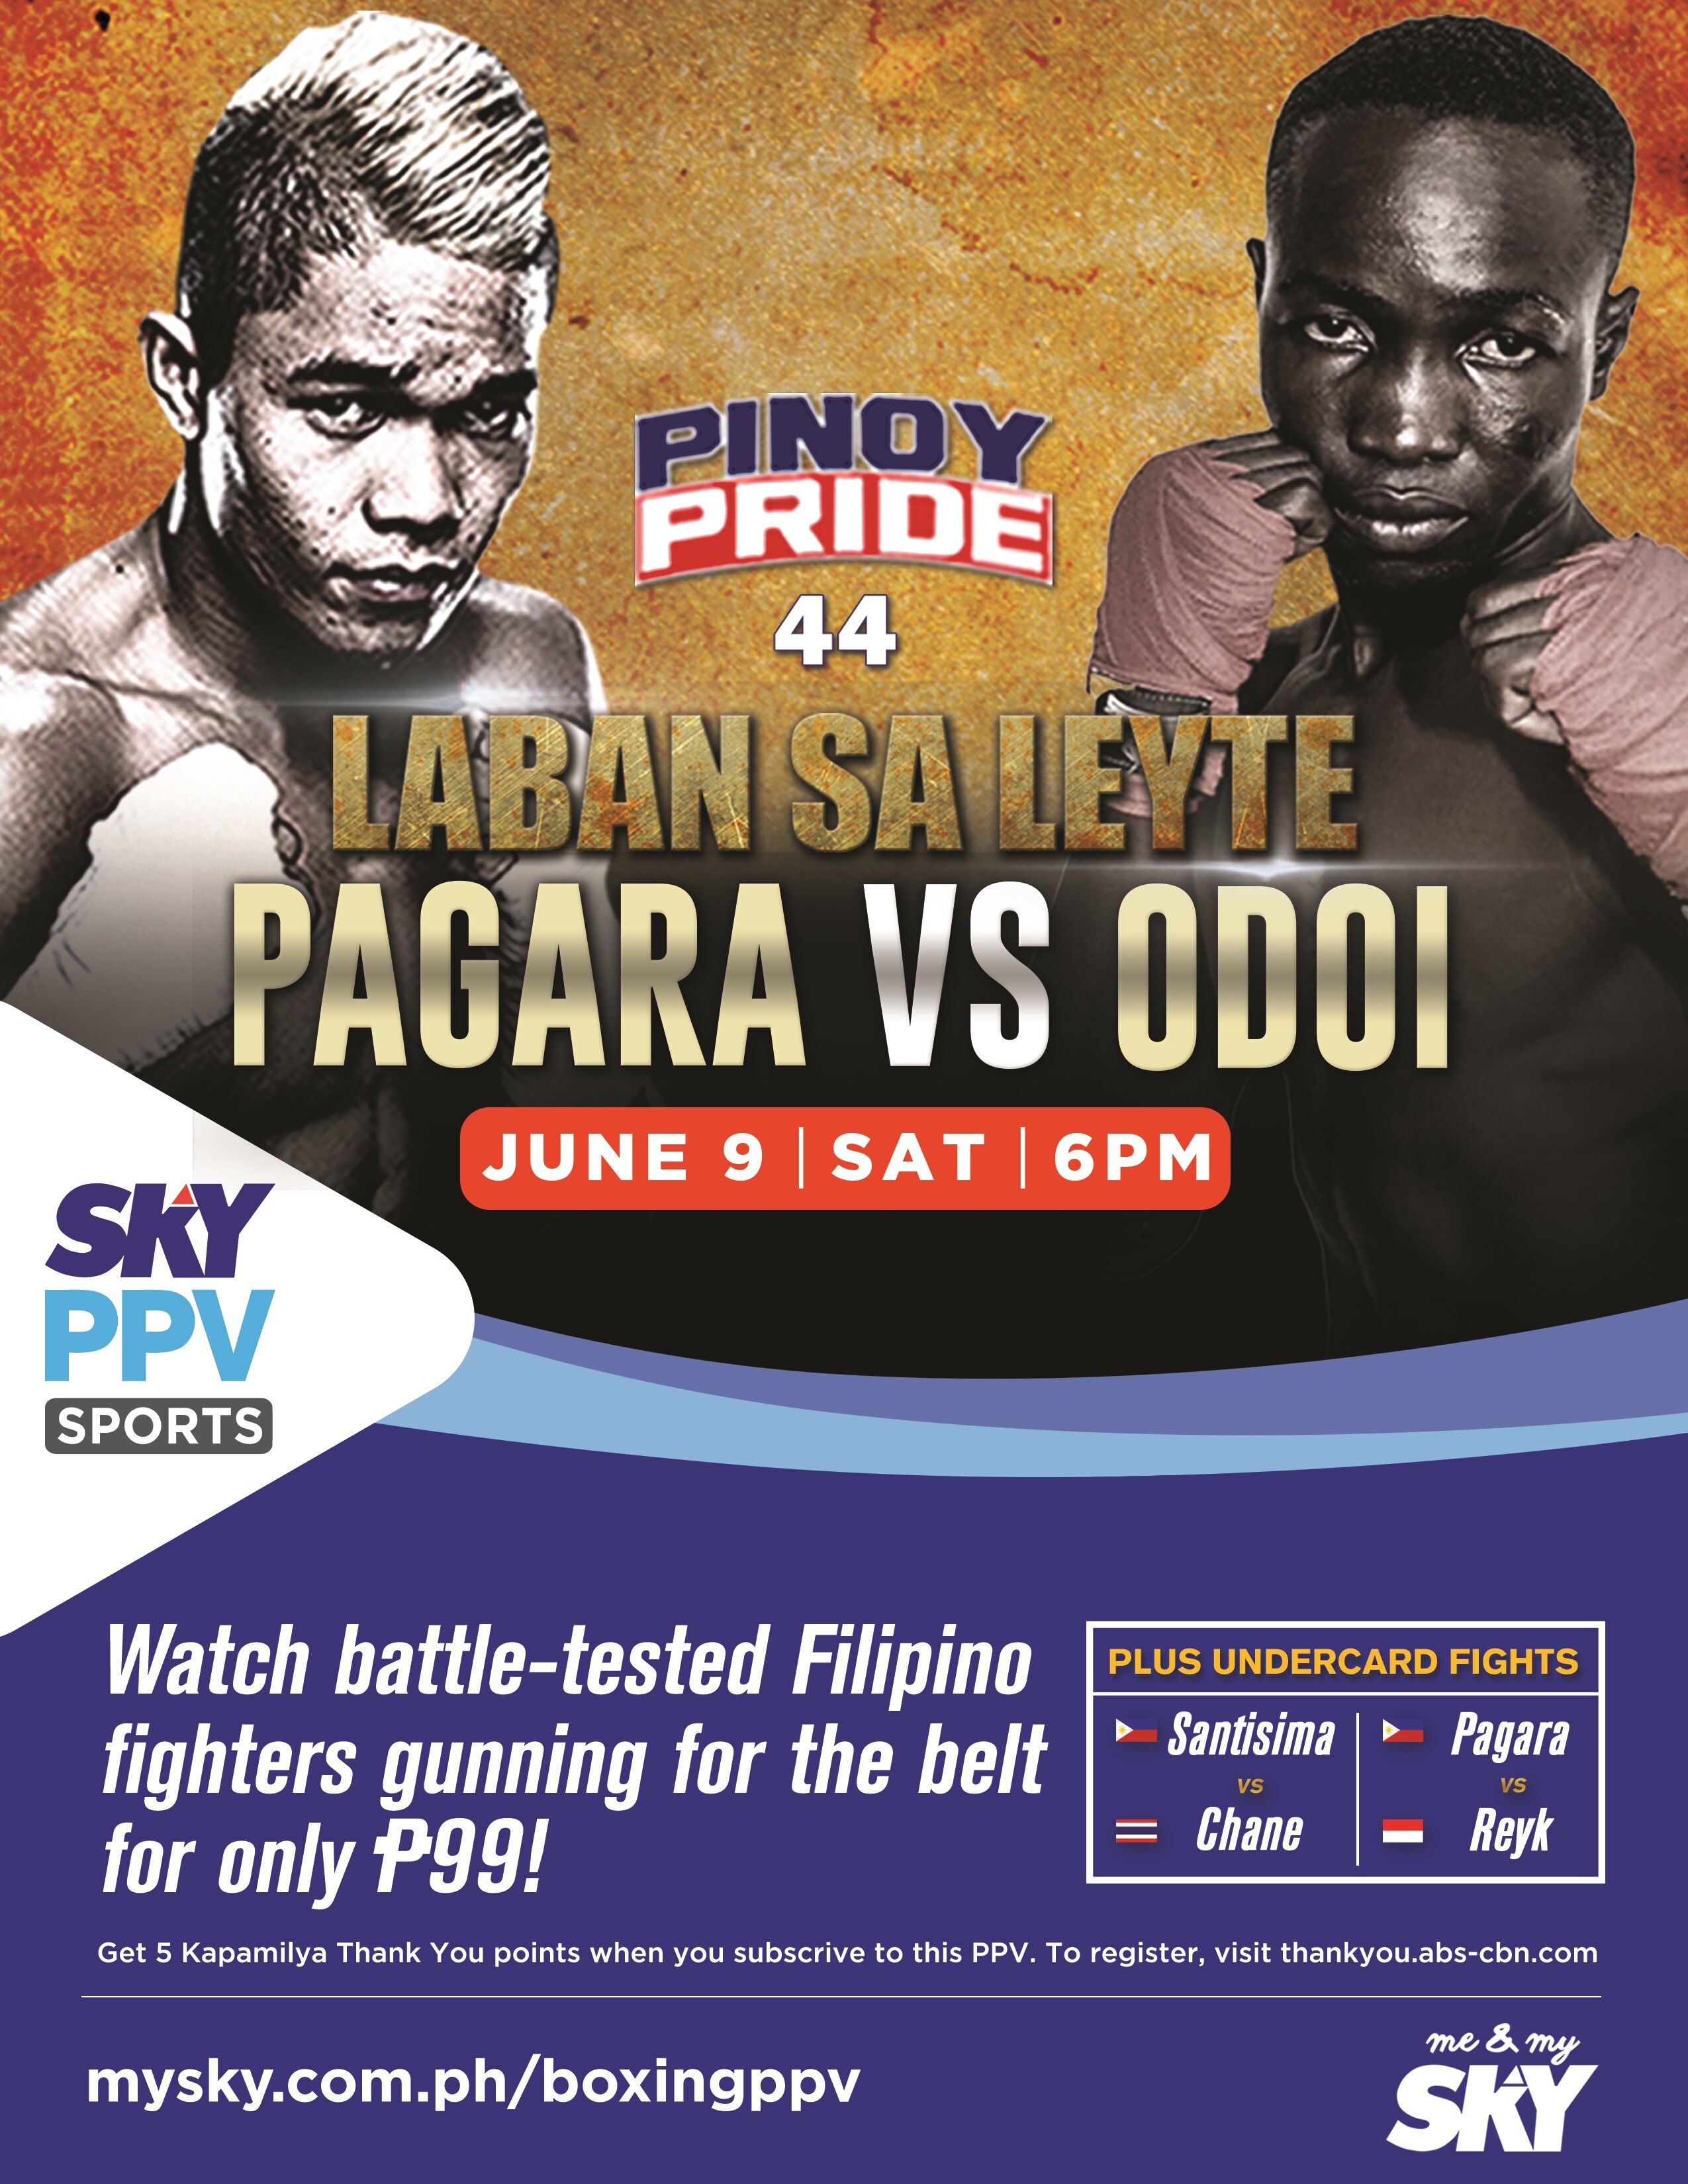 Pagara to go all out vs Odoi in Pinoy Pride 44 on SKY Sports Pay-Per-